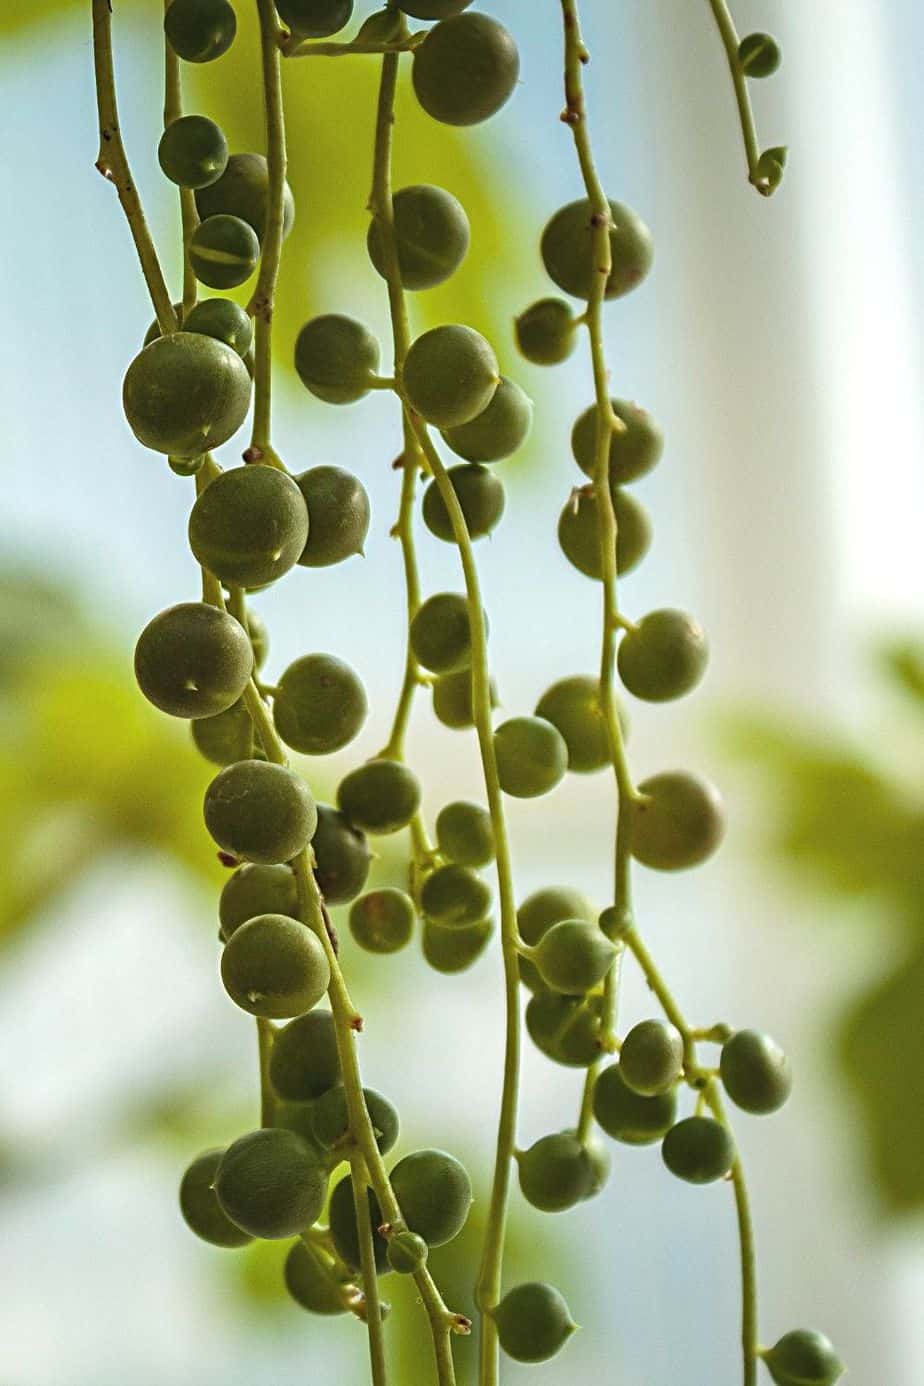 String of Pearls, with its long spherical and draped stems, is a great way of beautifying your southeast-facing window